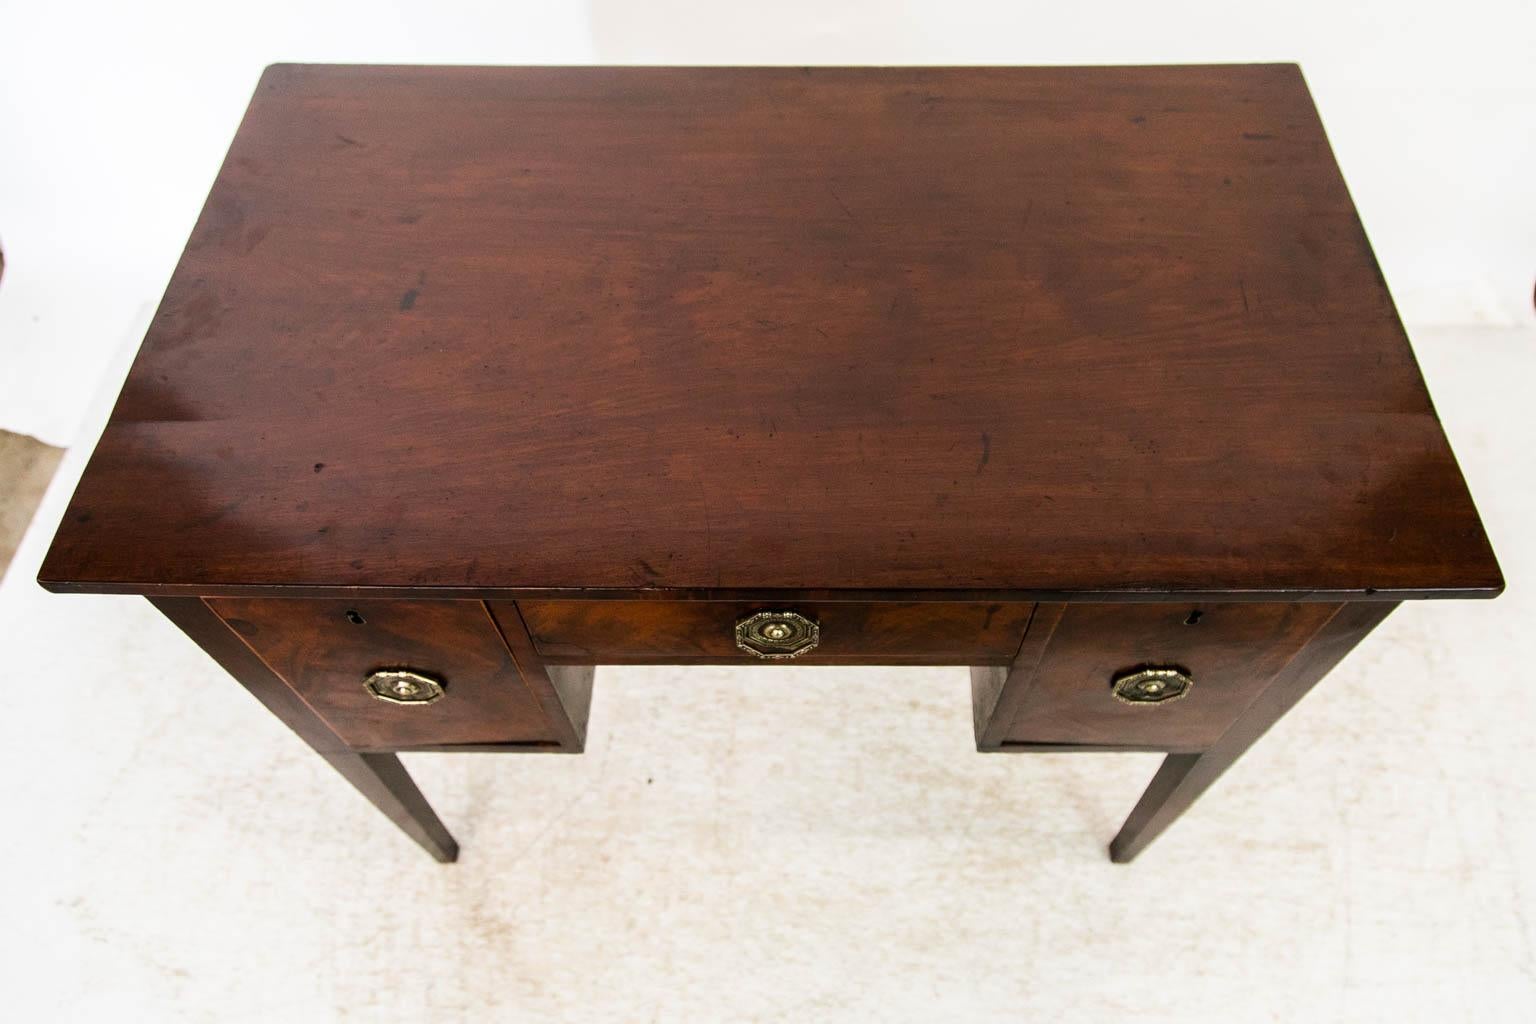 The top of this table has one single board 19 1/2inches deep joined to a two inch board in the rear. The drawer fronts are flamegrained mahogany and are banded with boxwood edging. There is some spotting on the left hand drawer.